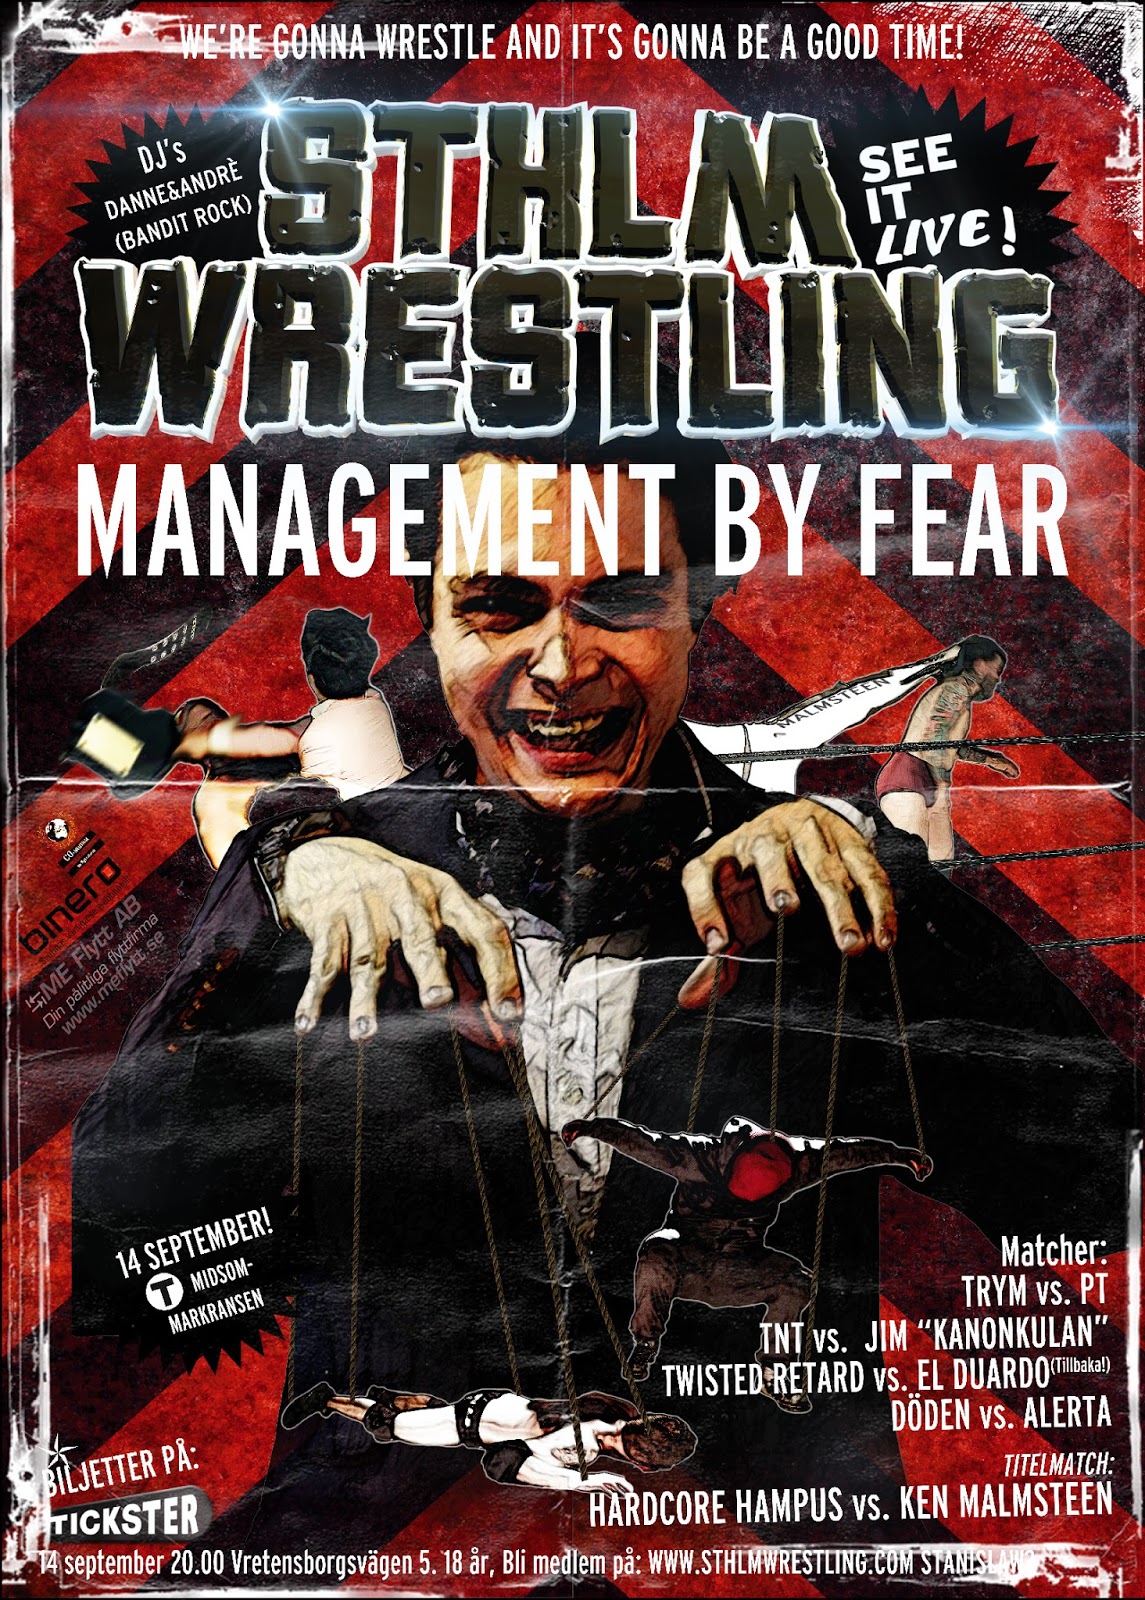 Management By Fear